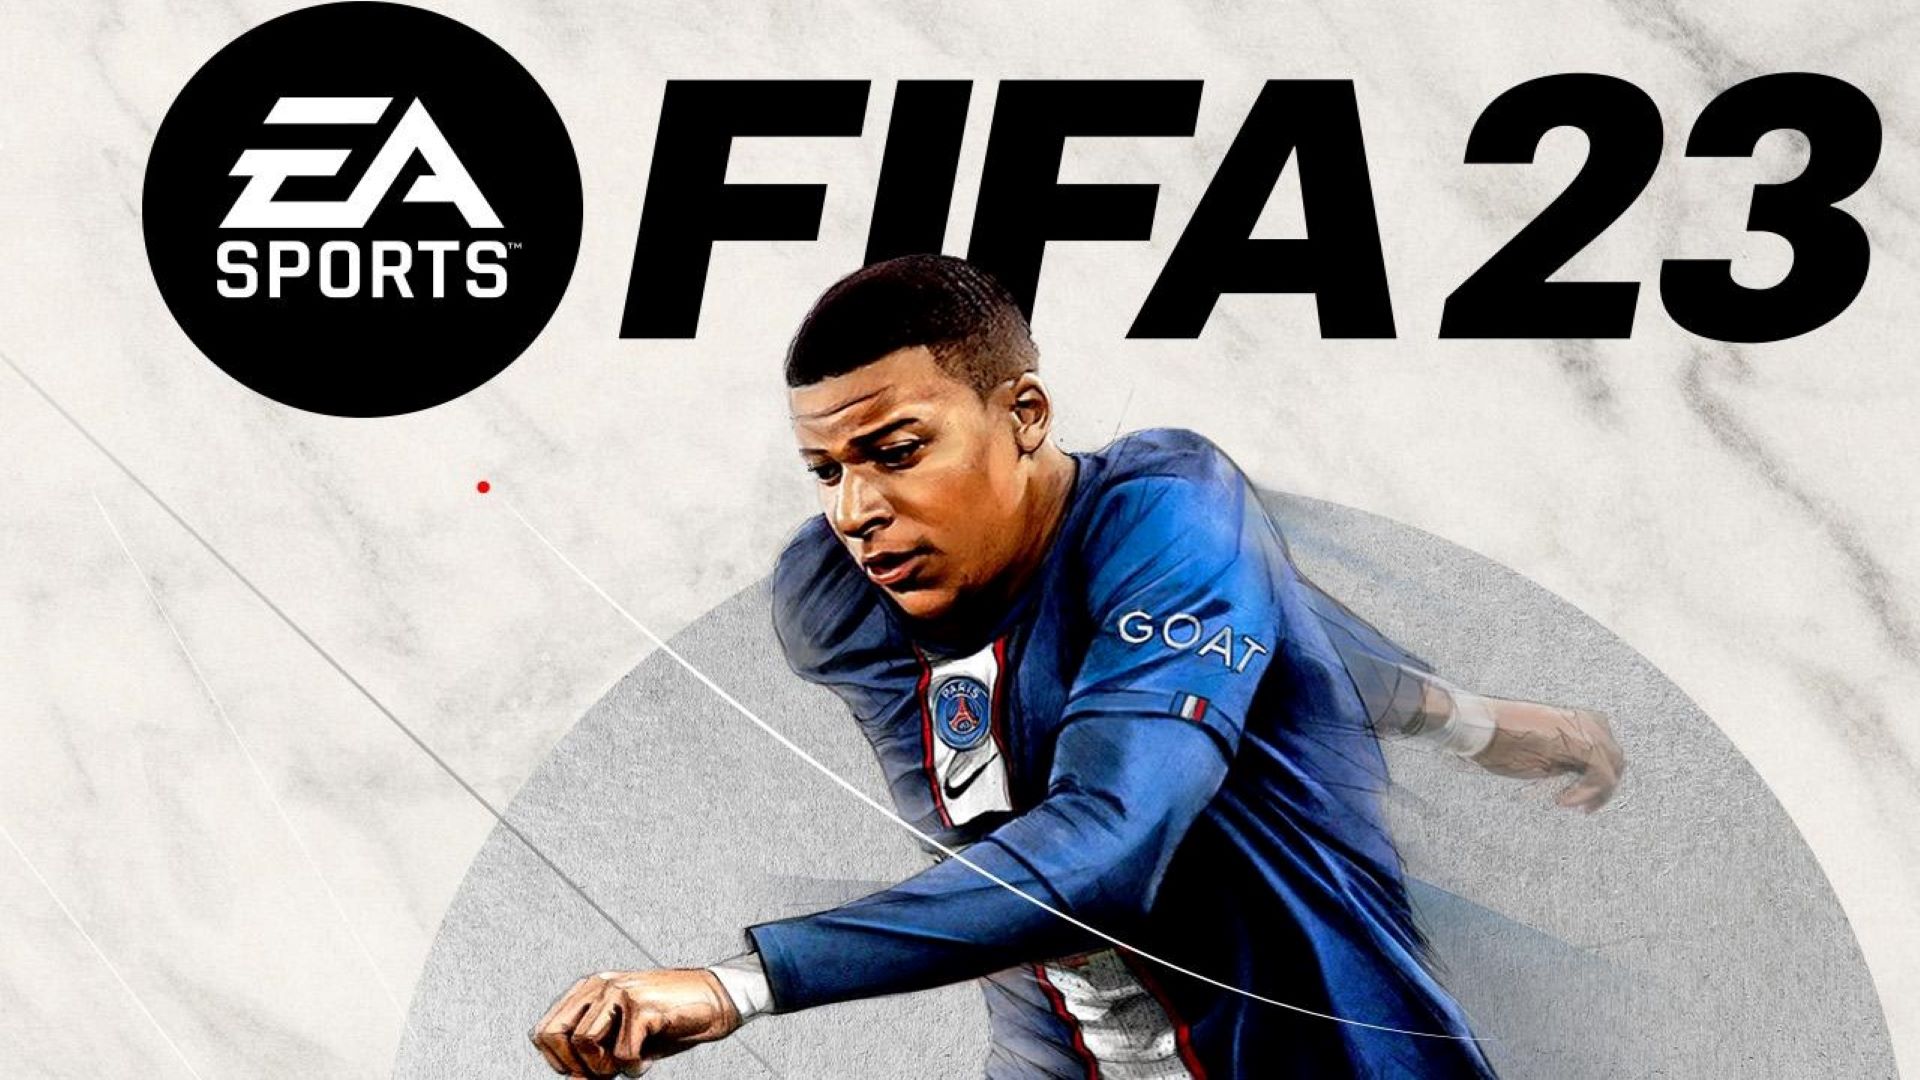 Stable version FIFA 23 crack + more sites to download the game #bigda